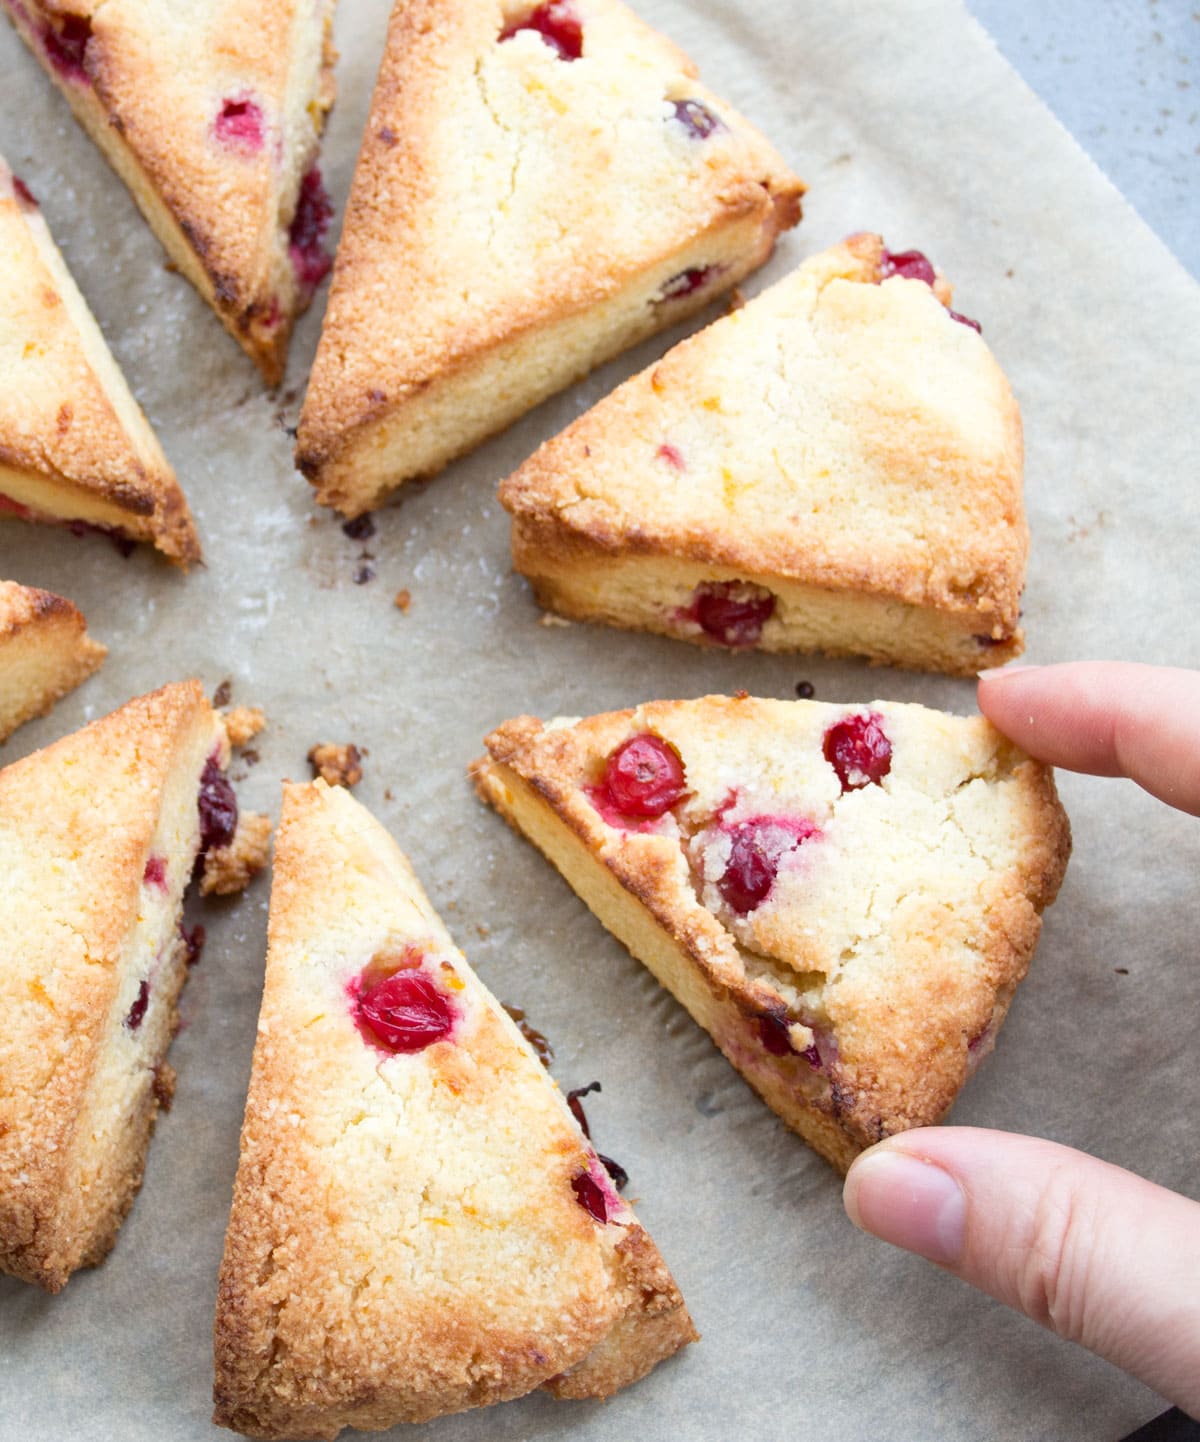 Triangular cranberry orange scones arranged in a circle on parchment paper